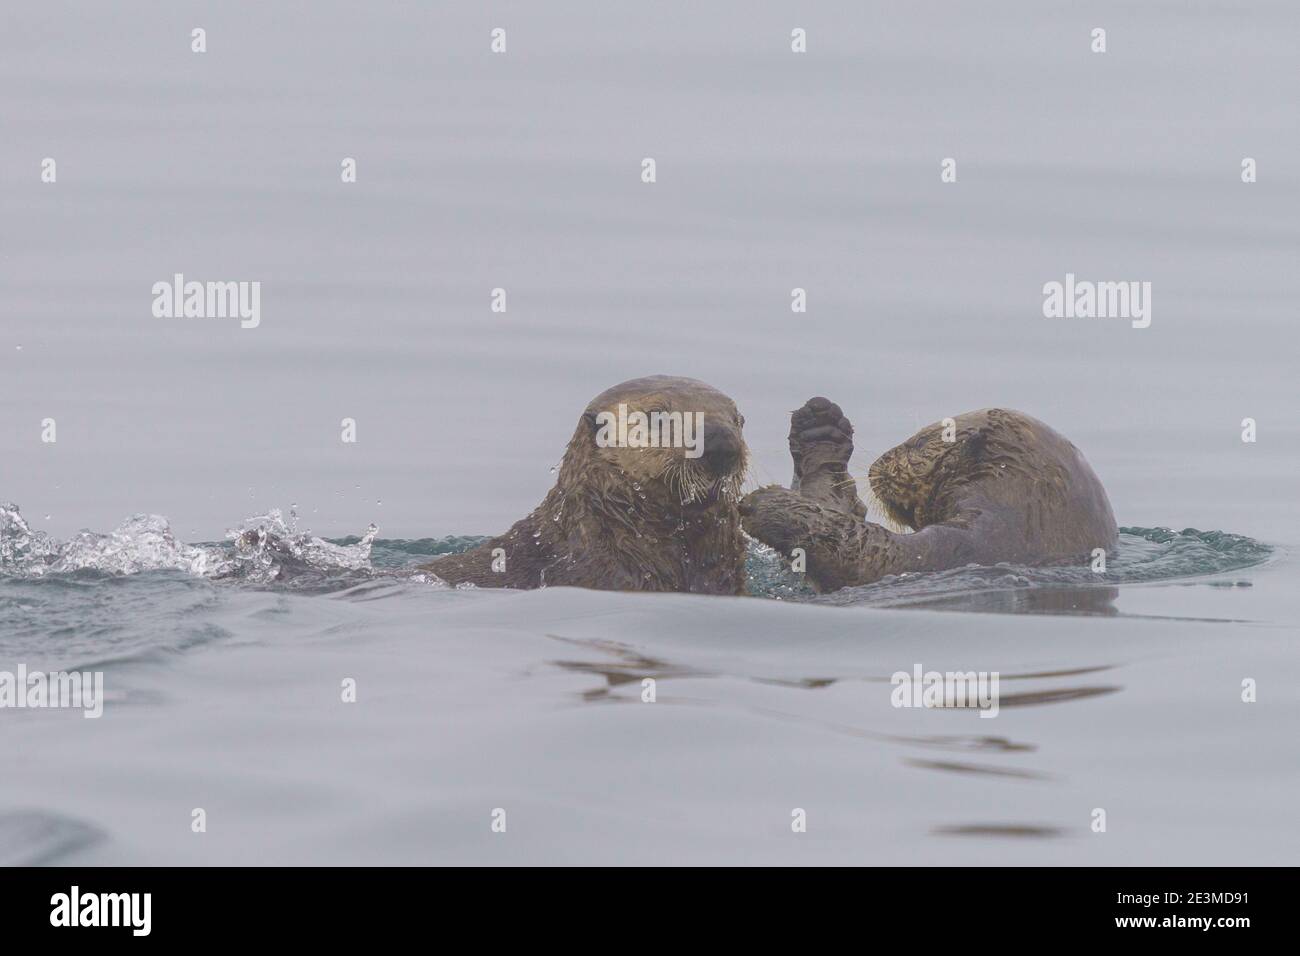 Sea otters playing on a calm foggy day along the West coast of Vancouver Island, British Columbia, Canada Stock Photo